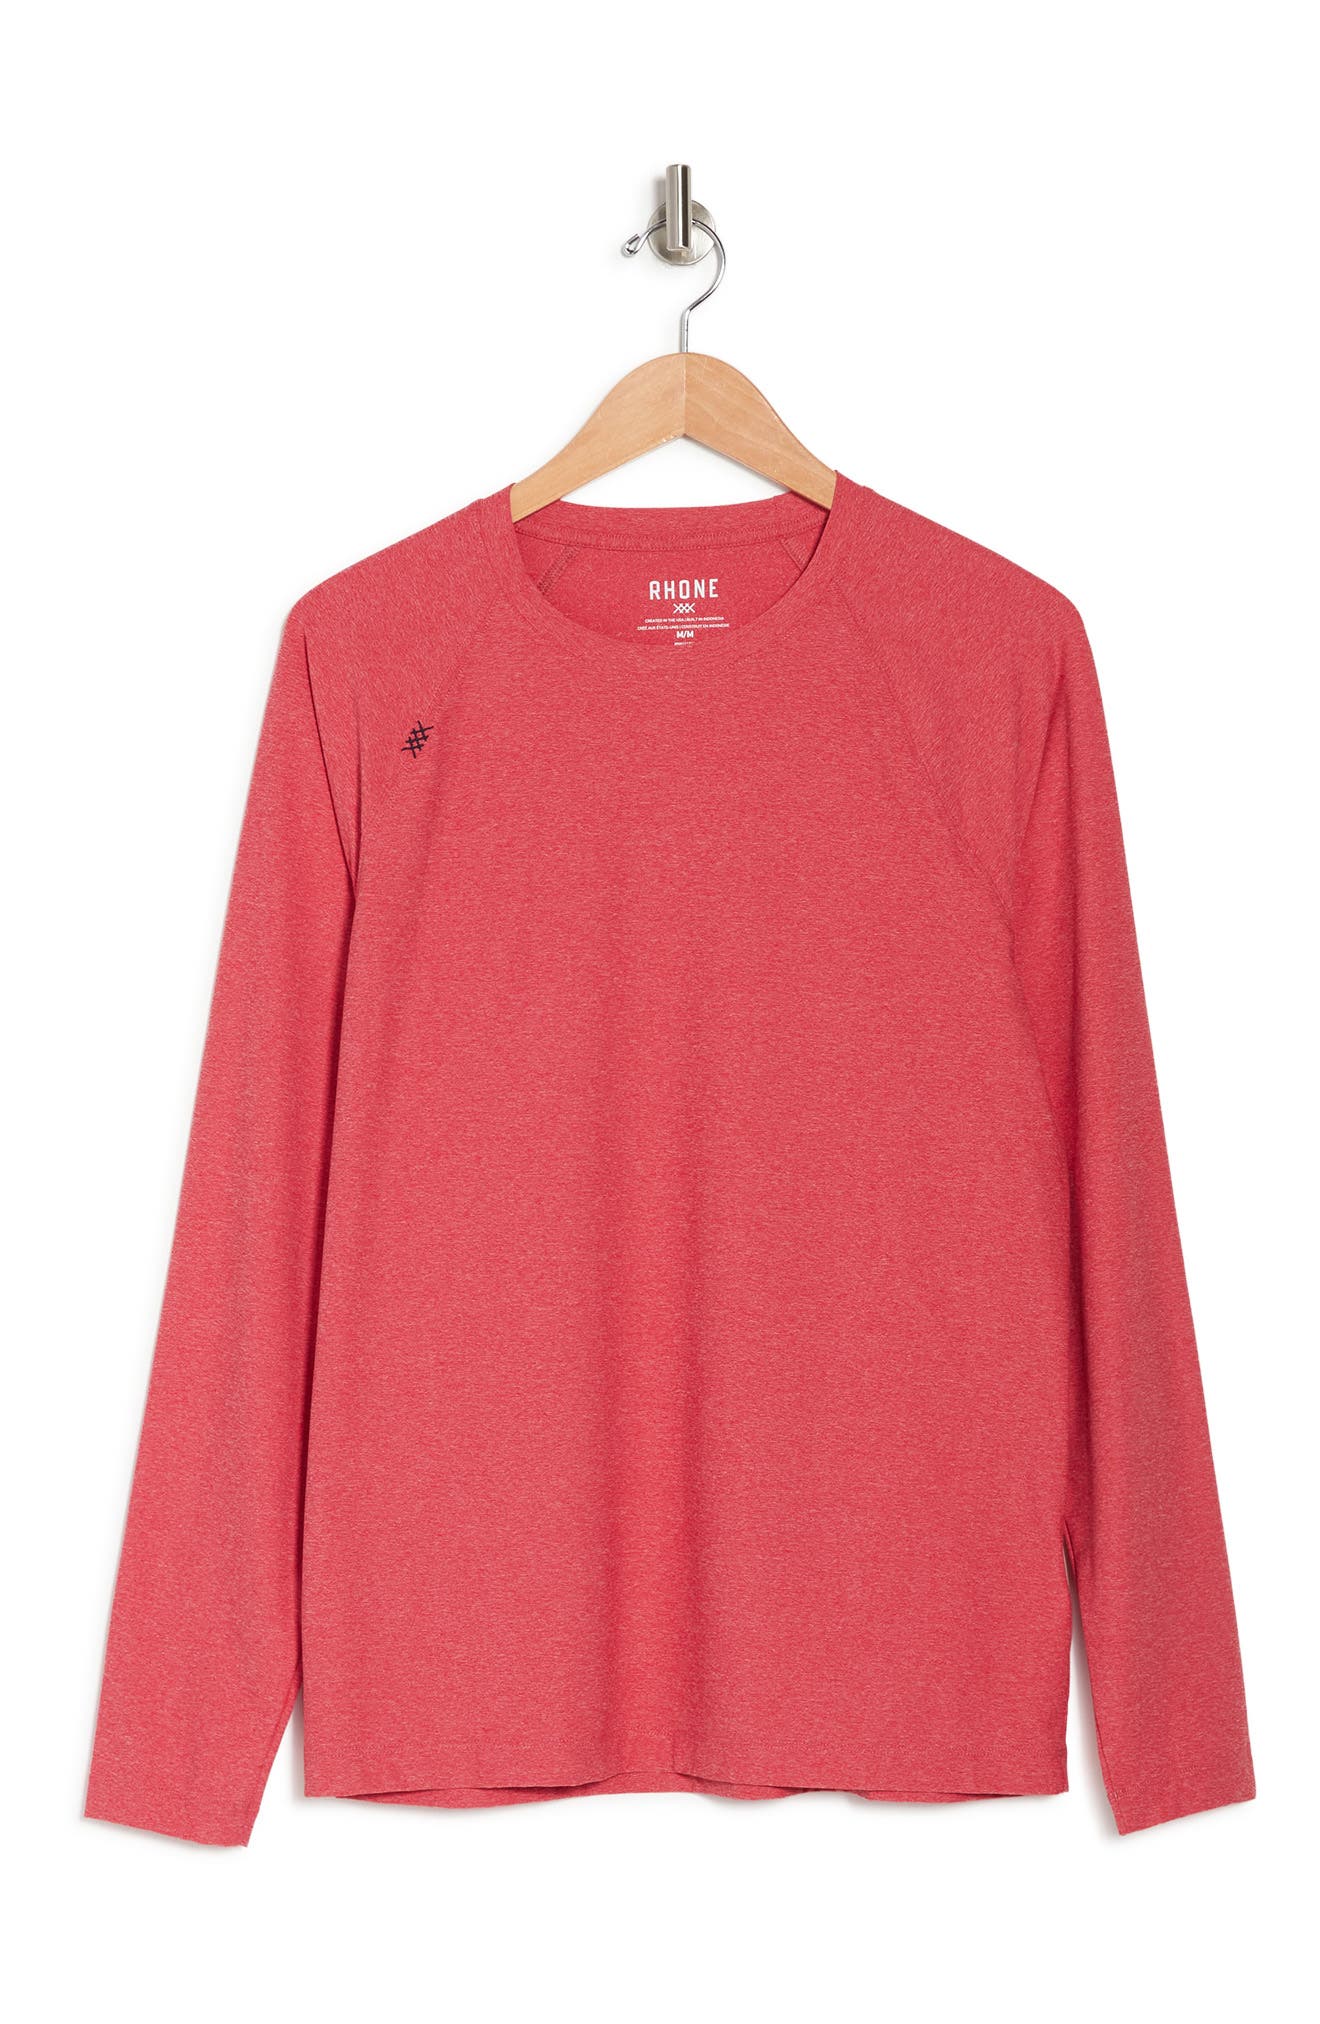 Rhone Reign Long Sleeve Performance T-shirt In Scarlet Heather